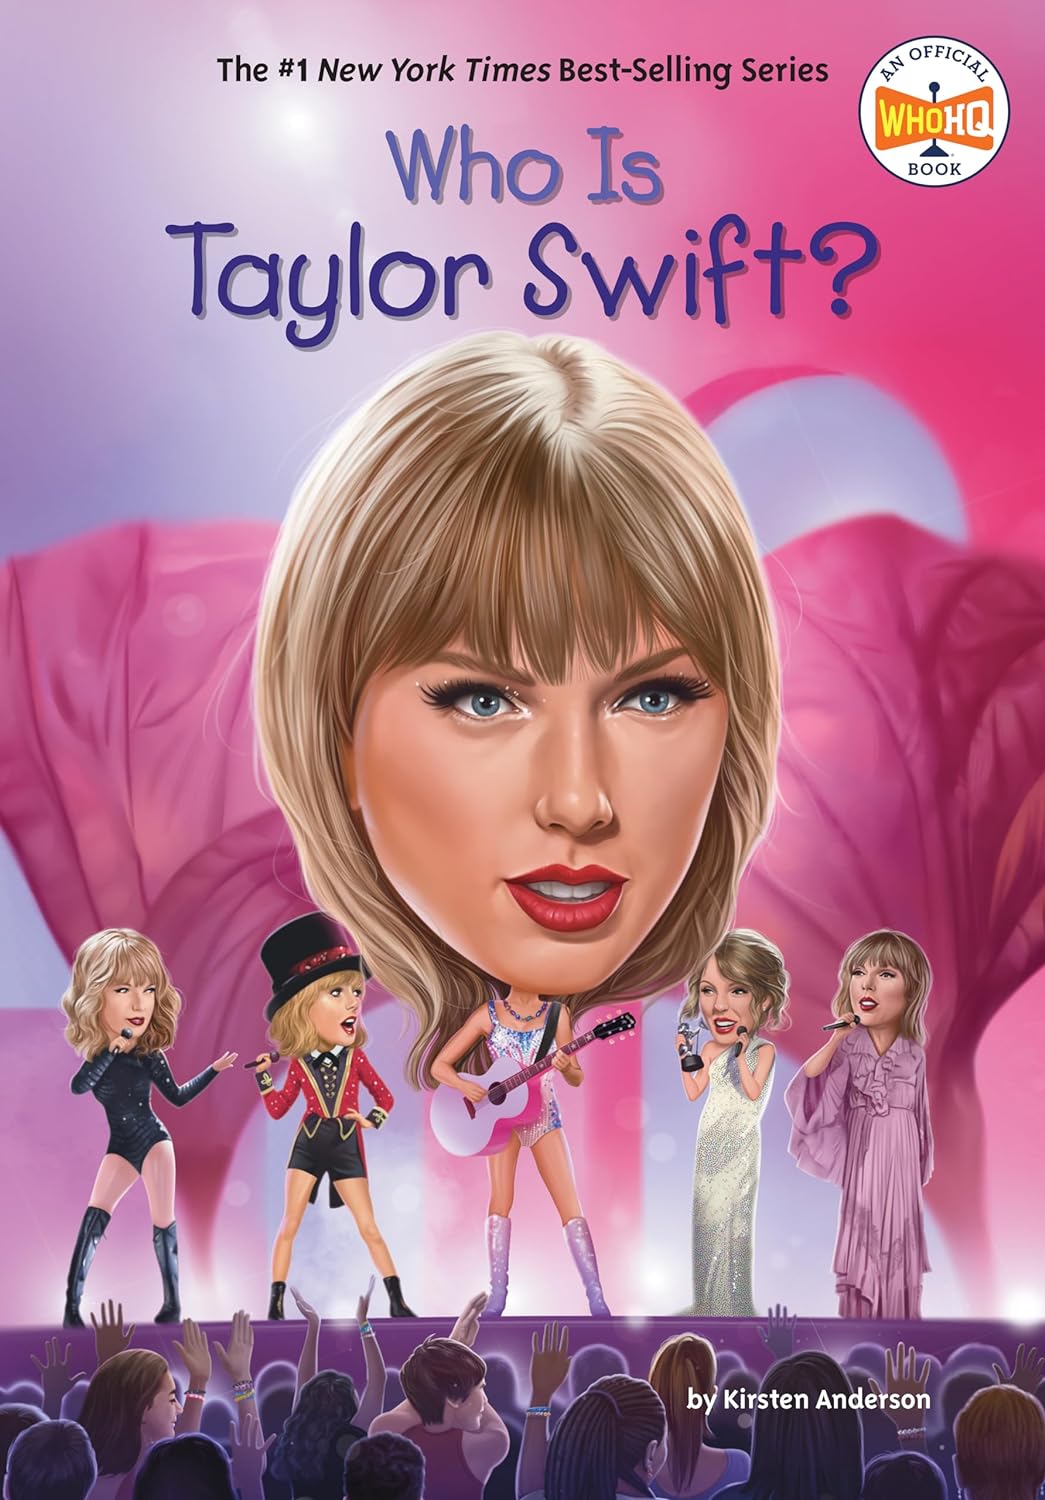 Who Is Taylor Swift - Who Was - NJ Corrections Book Store